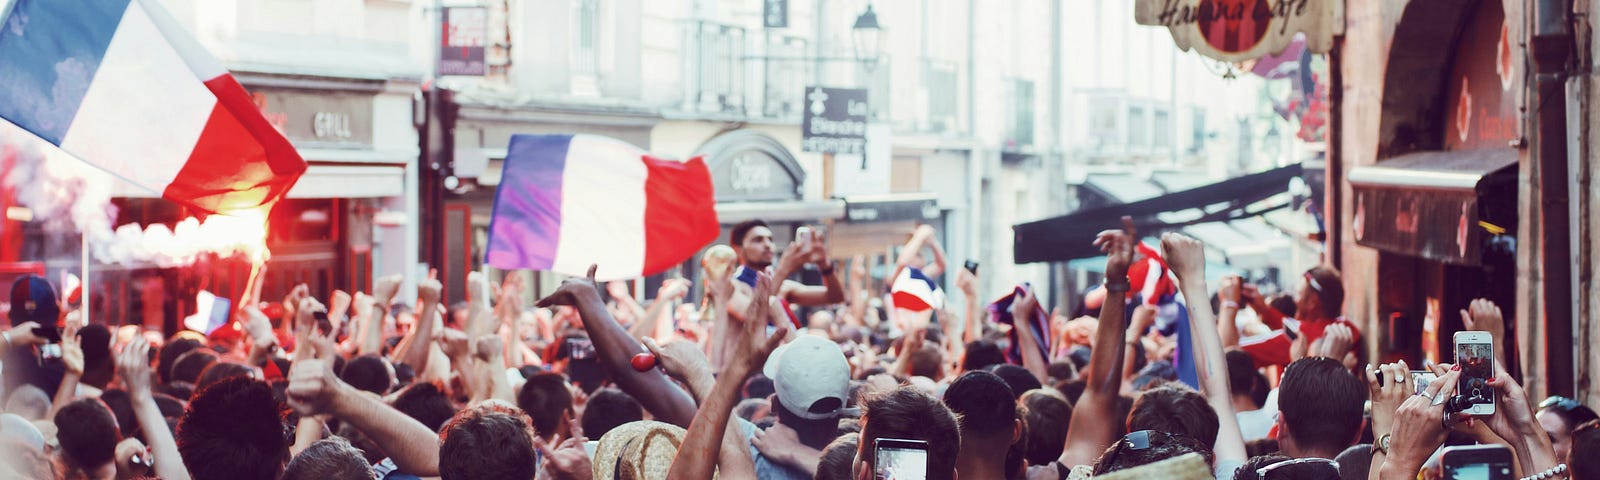 French fans wave flags and display their passion for their soccer team.